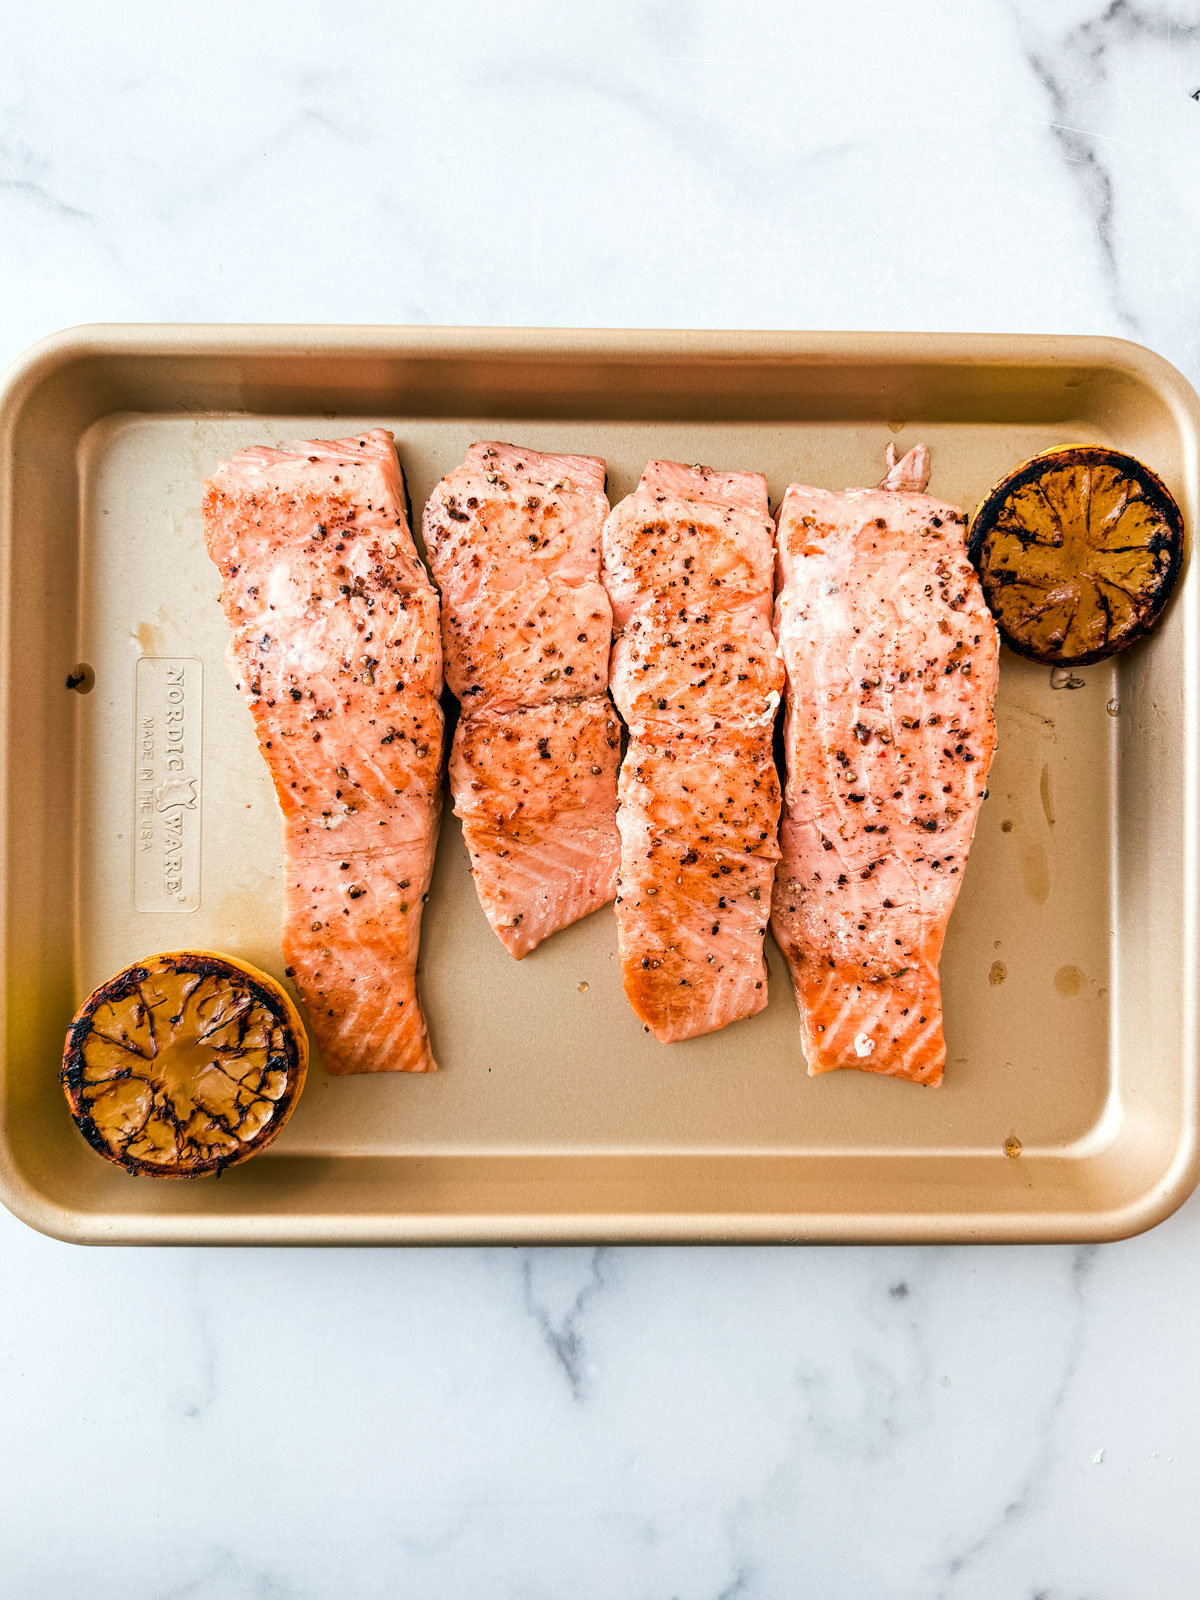 Cooked fillets of salmon on a small baking sheet with charred grilled lemon halves.